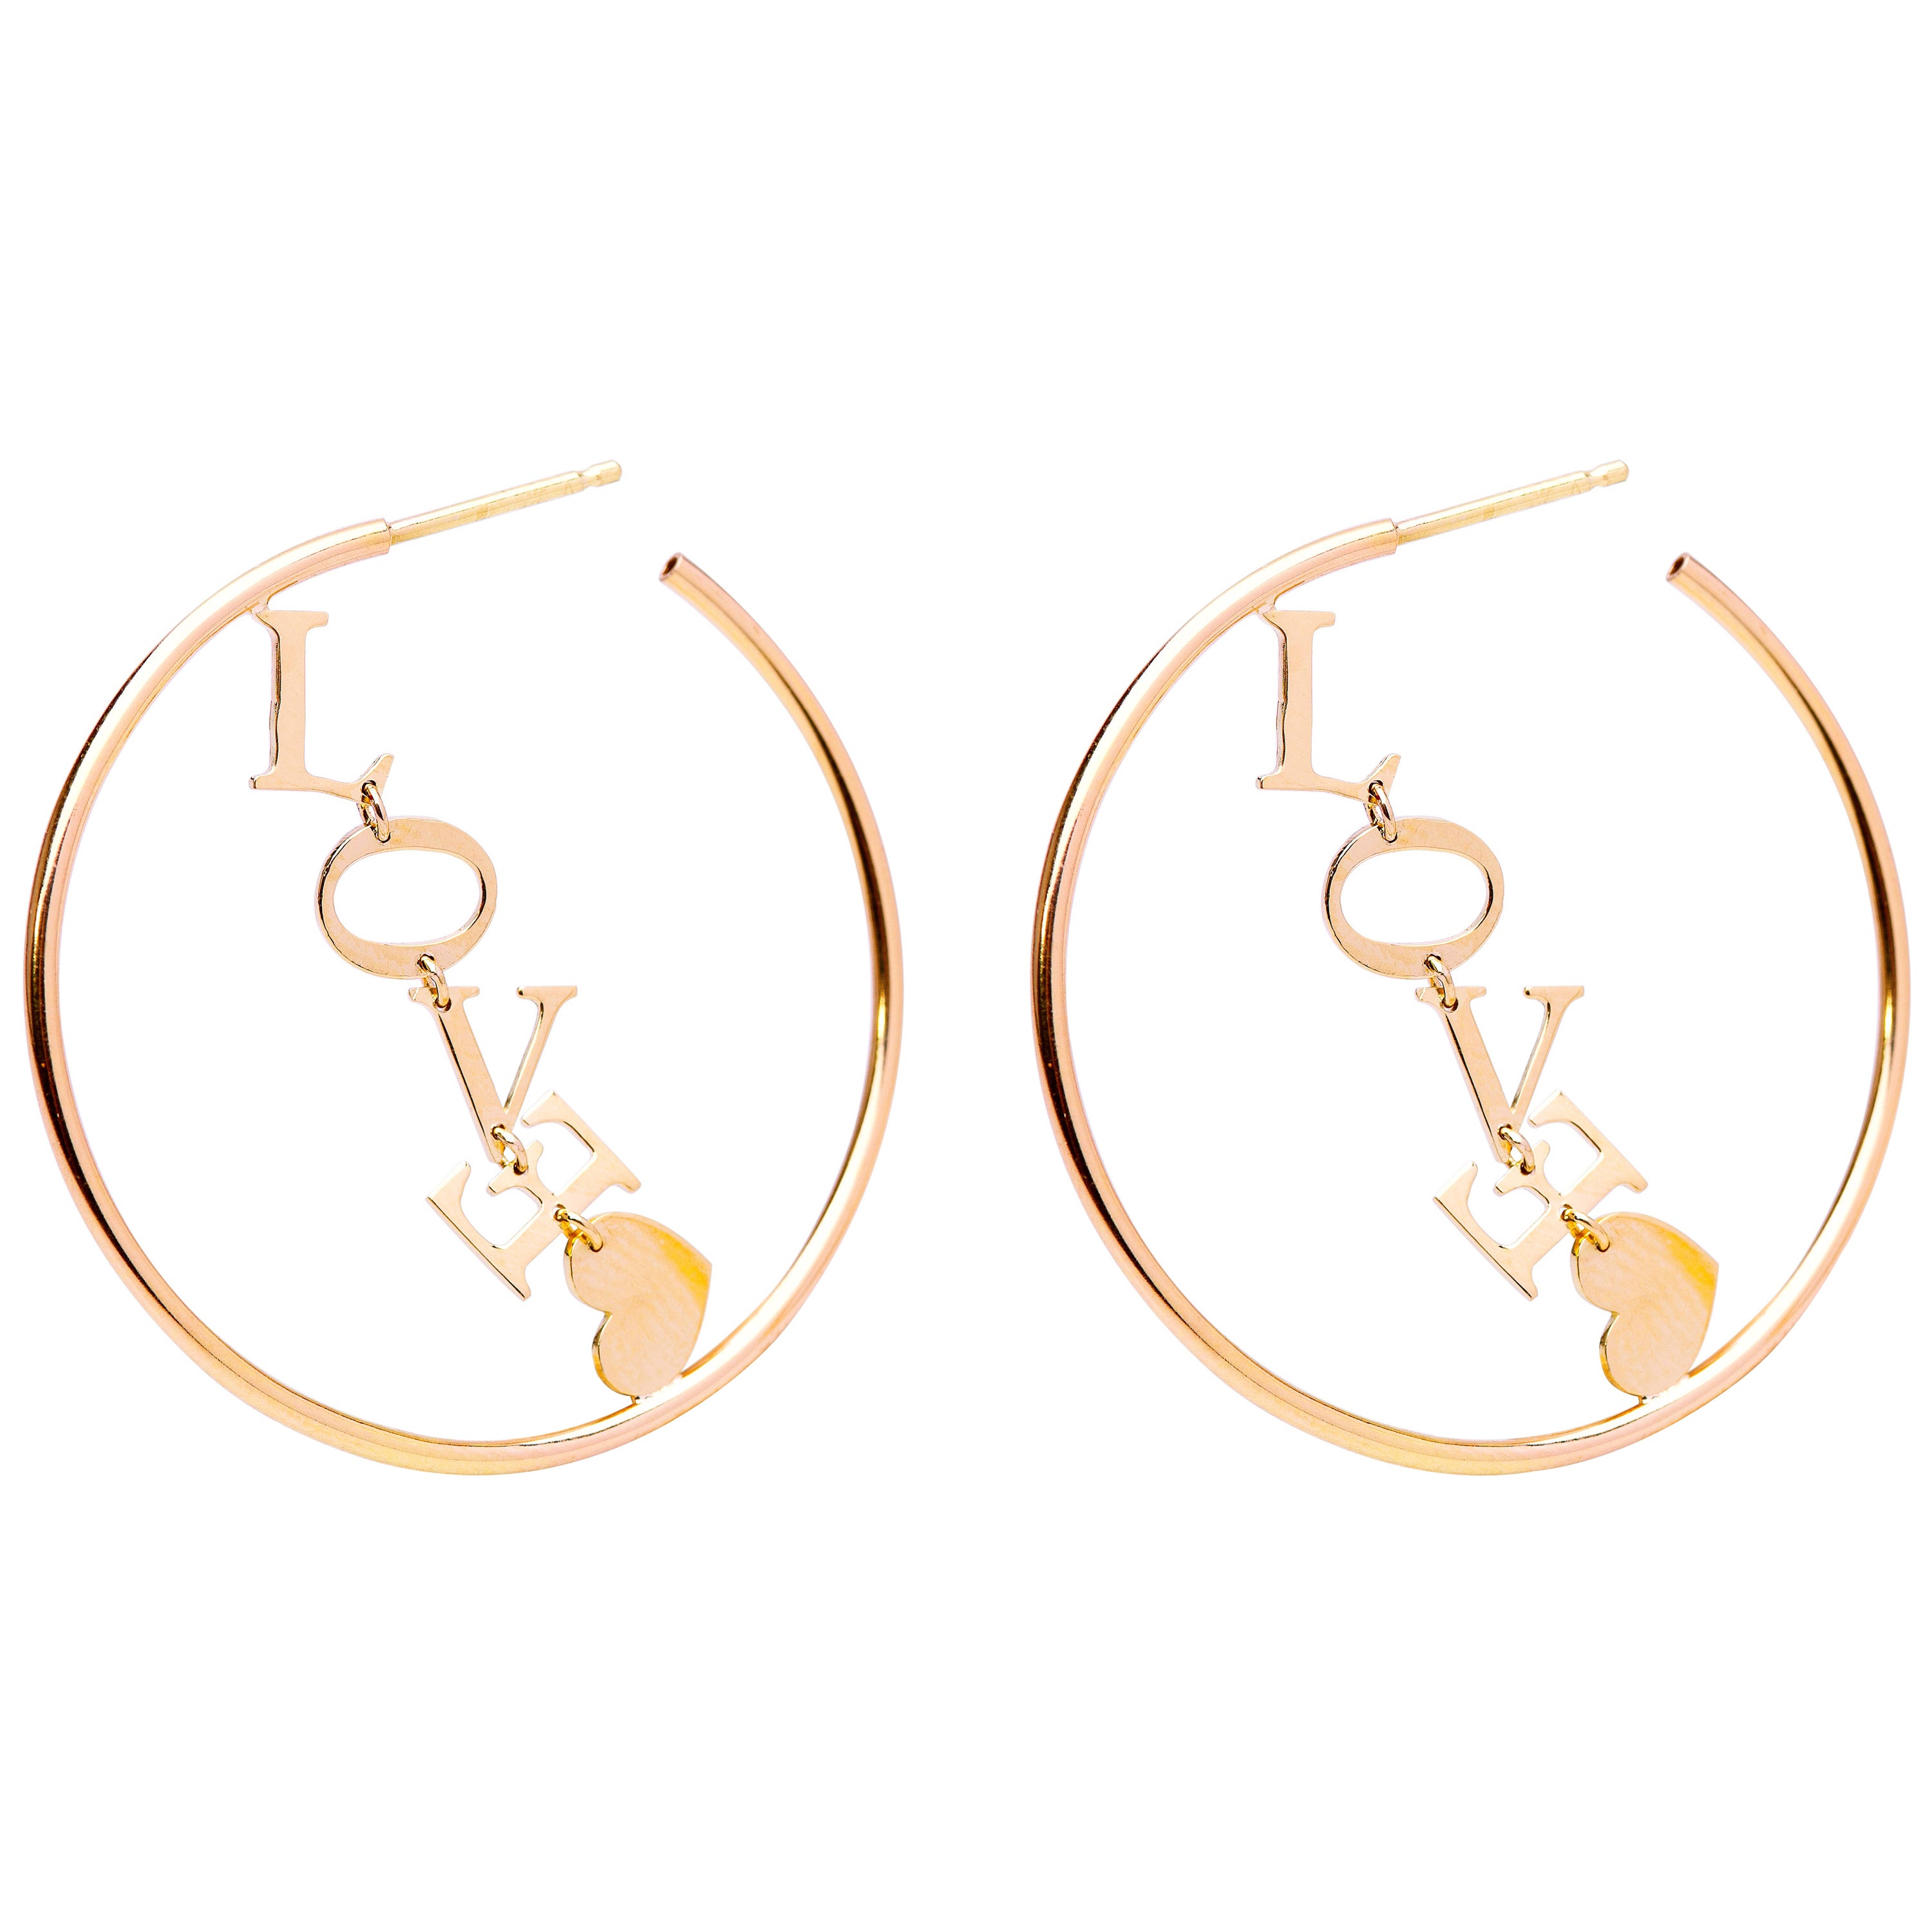 Love 18K Yellow Gold Letters Circle Hoops Handcrafted Design Earrings